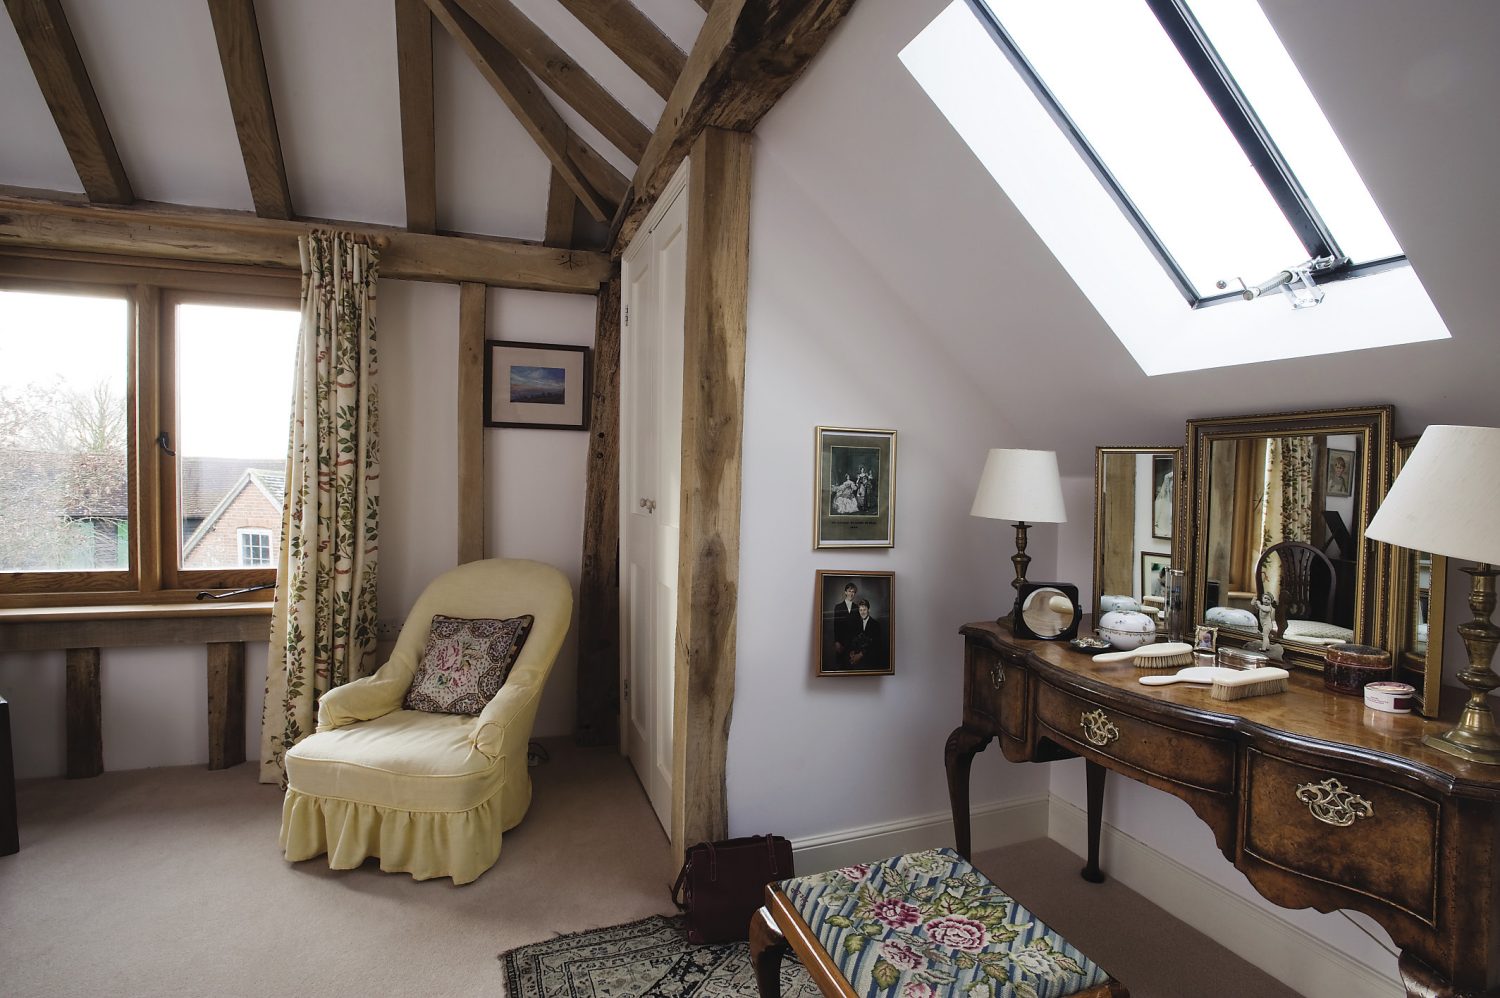 the couple’s bedroom has views towards both the North and South Downs.